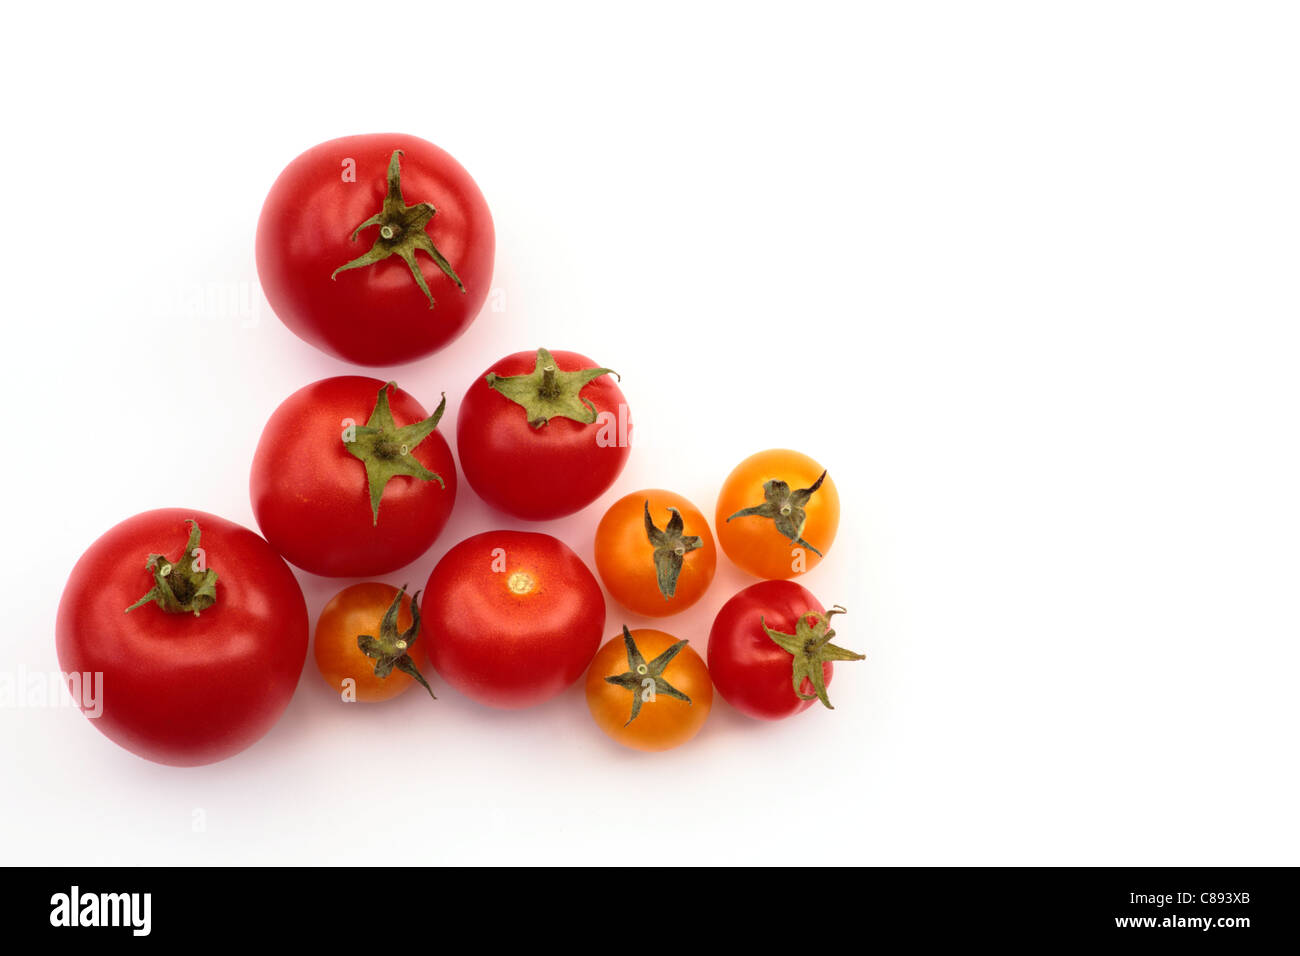 Many yellow and red tomatoes on a white background Stock Photo